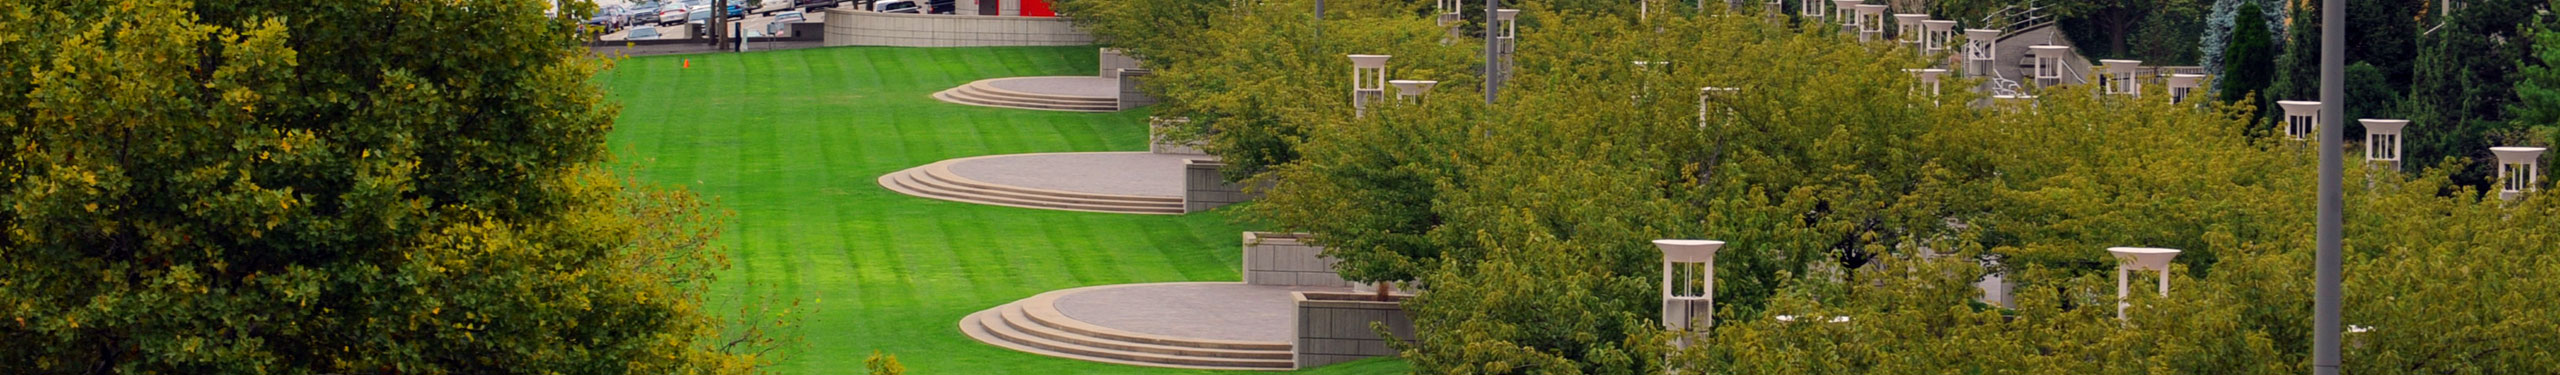 Commercial landscaping services at Sawyer Point Park and Yeatman's Cove